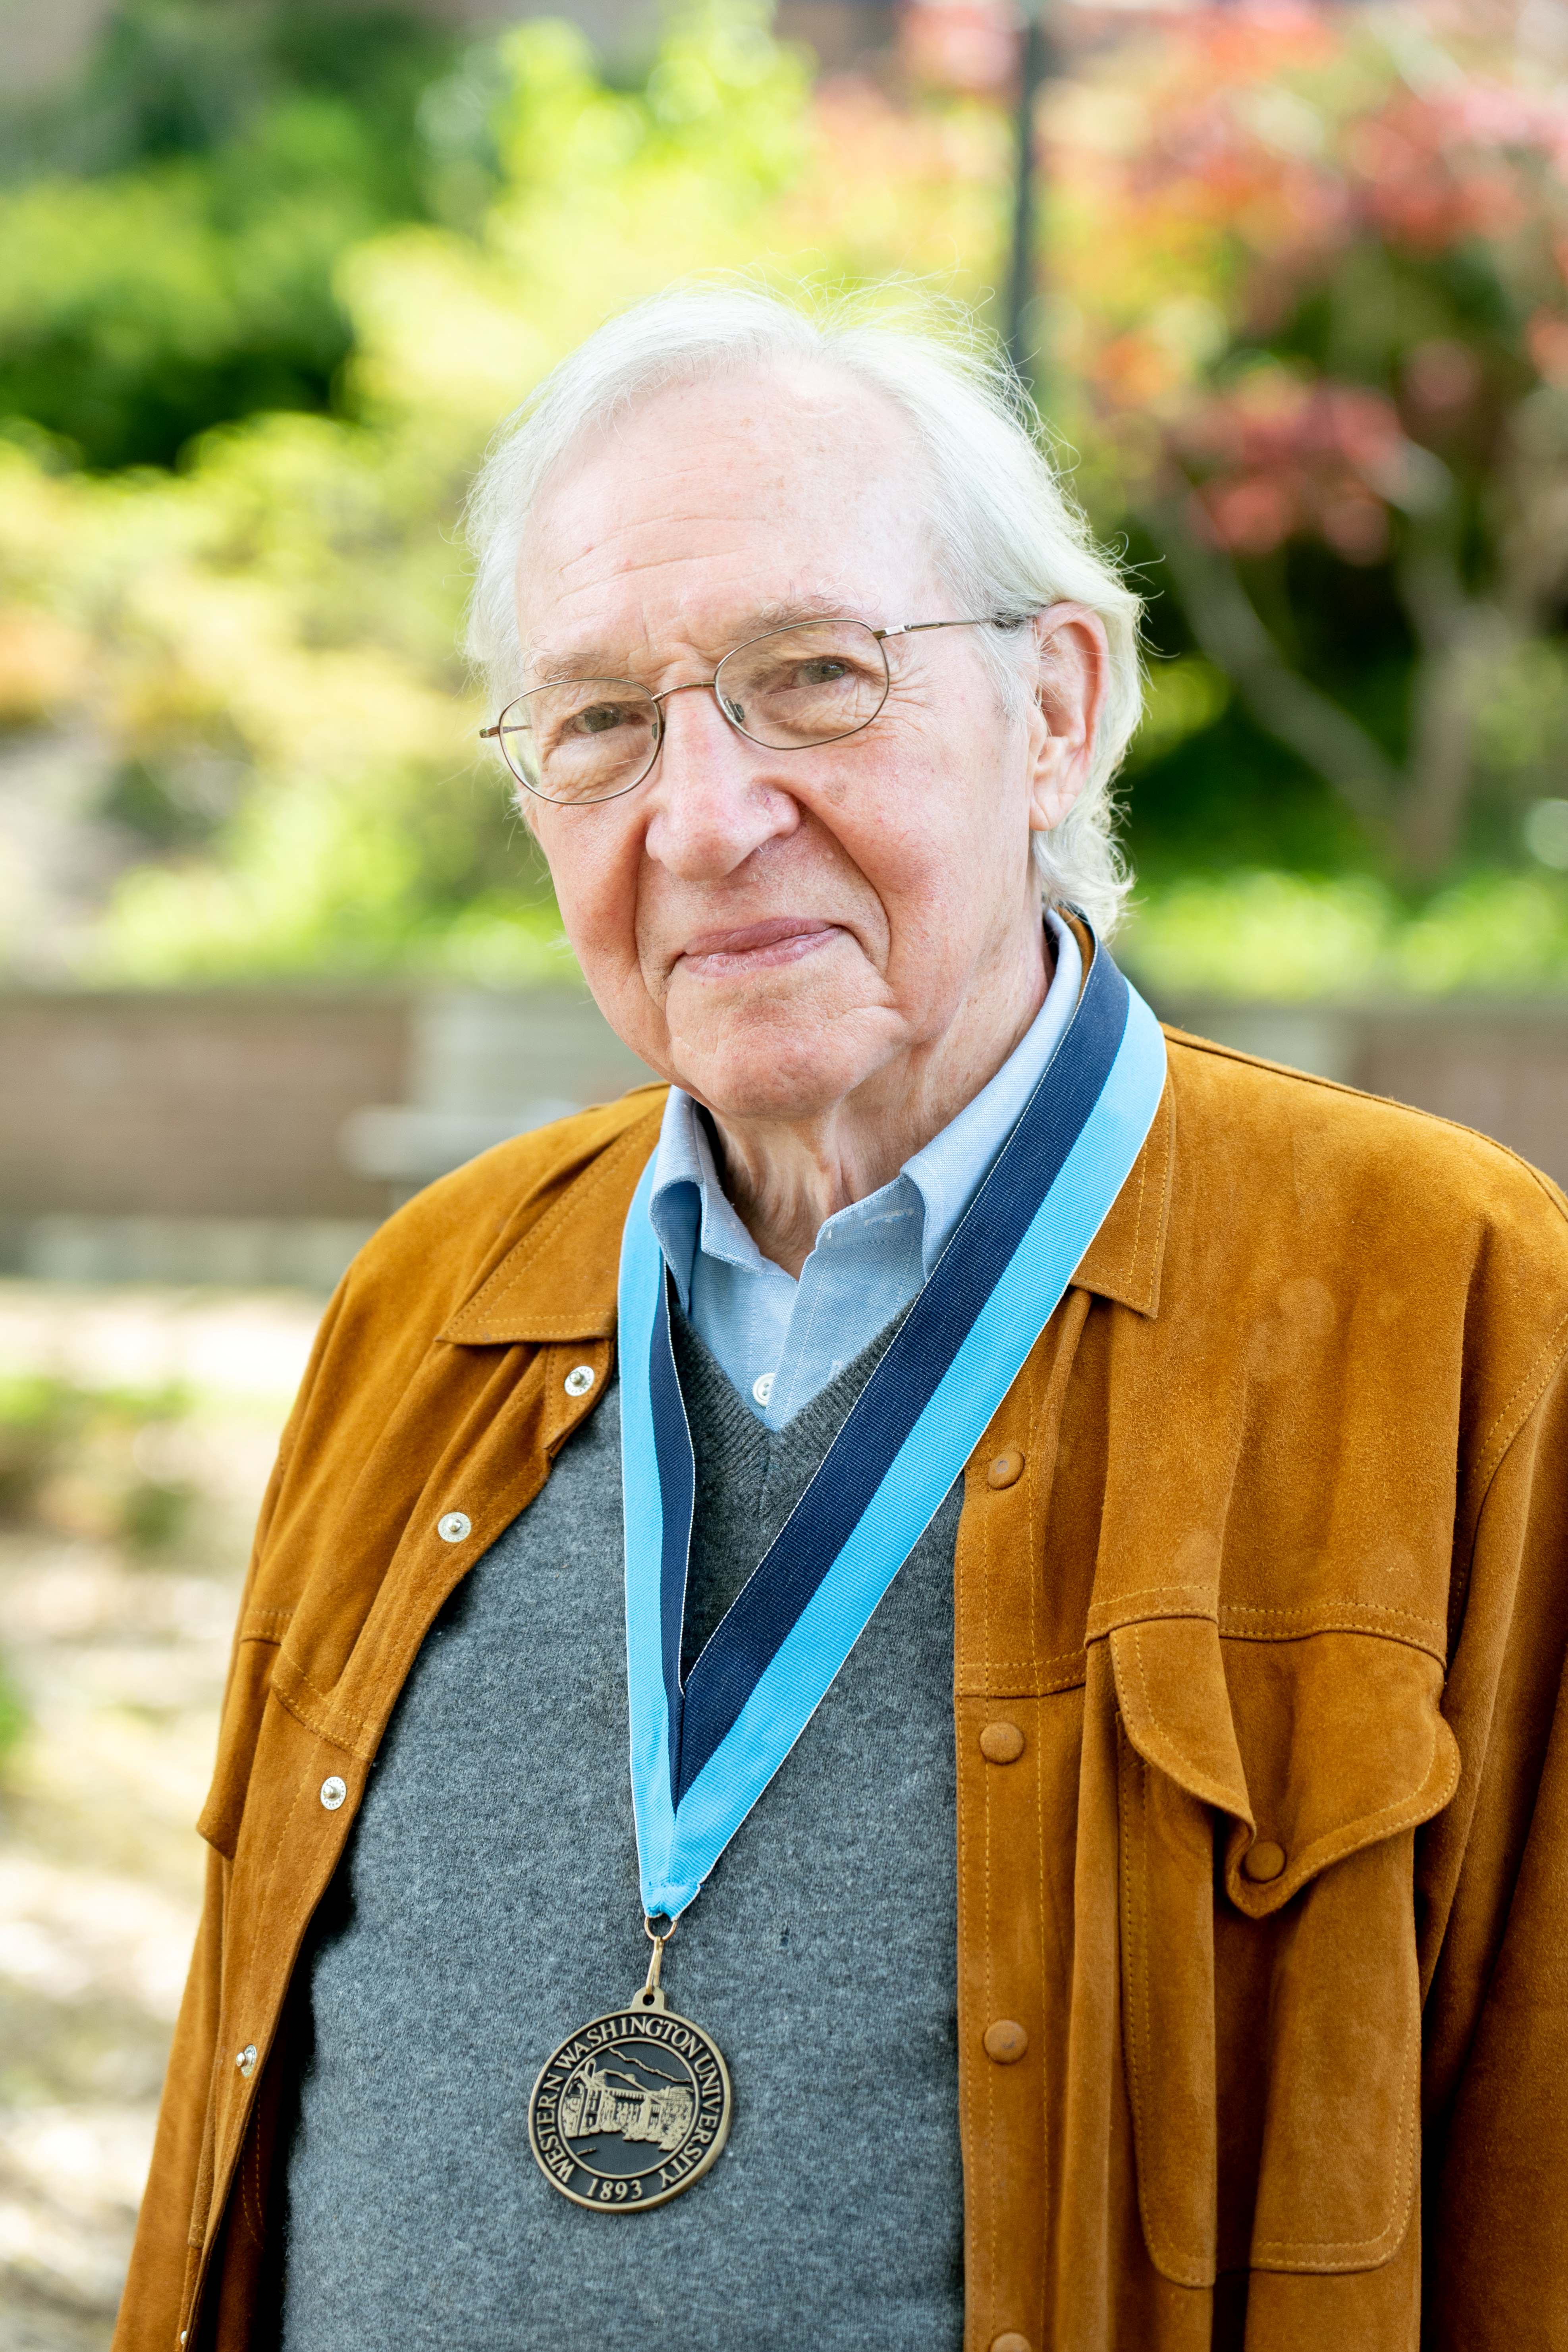 Professor Harris with a thoughful smile wearing an collared shirt and v-neck sweater and a WWU award medallion on a neck ribbon